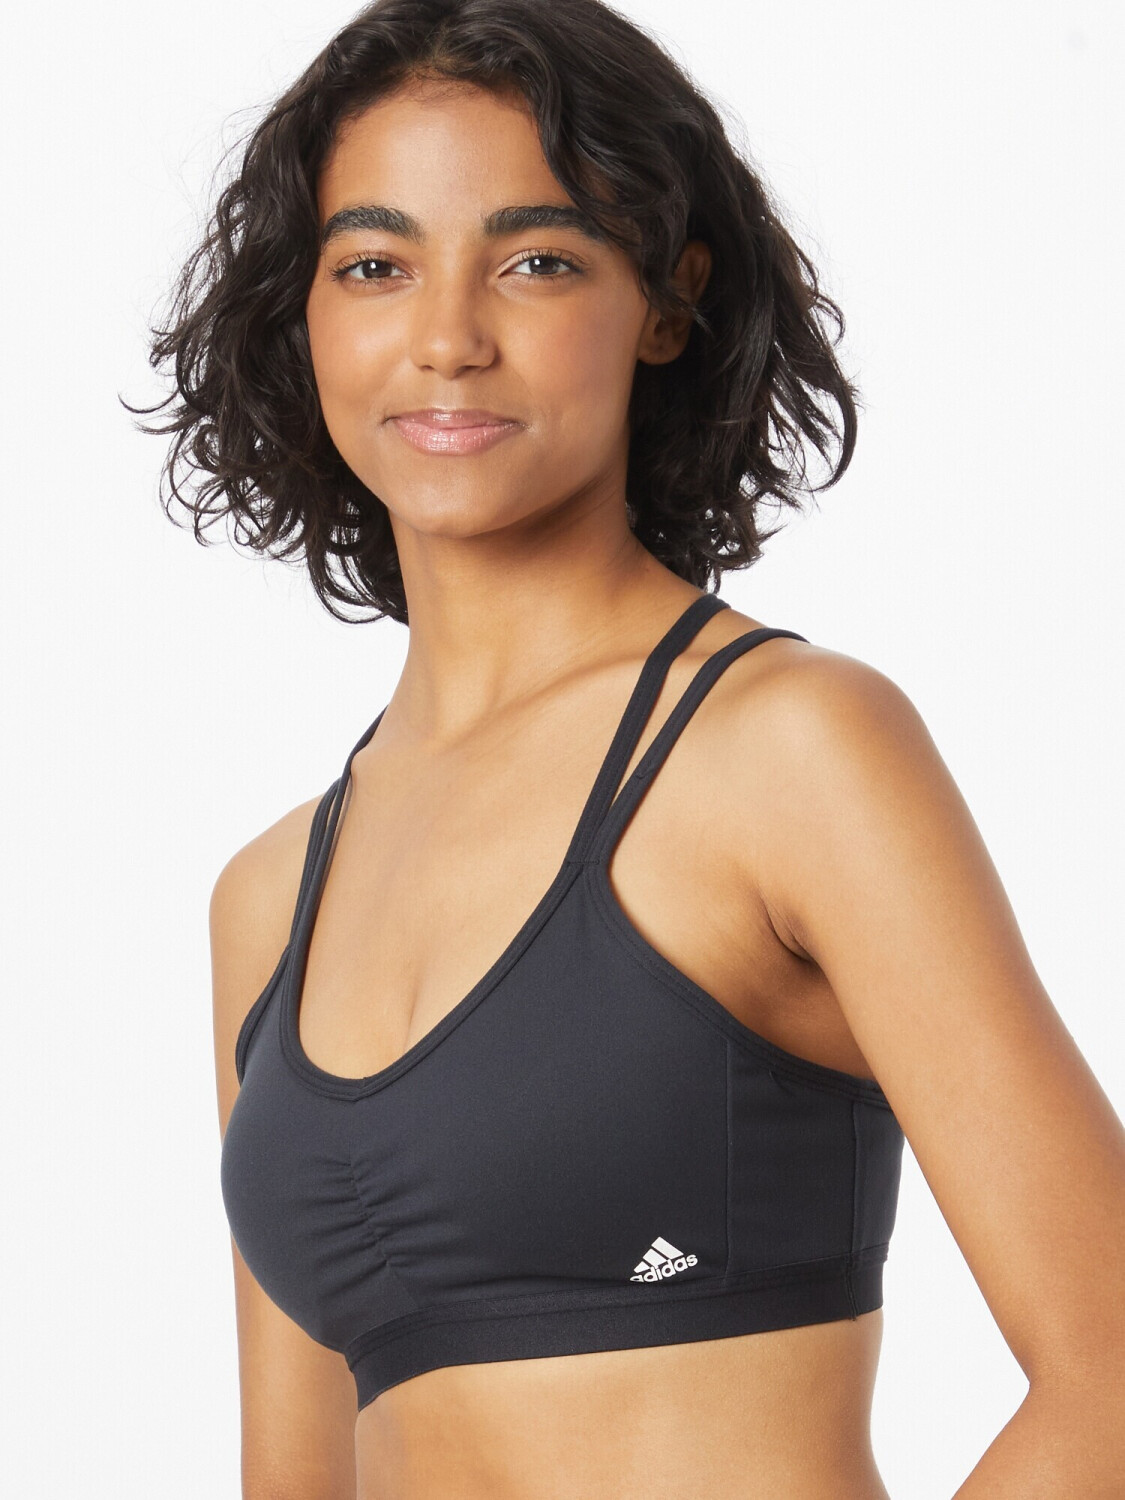 Buy Adidas Yoga Essentials Light-Support – on black bra Best (HE9060) from sports Deals £9.60 (Today)